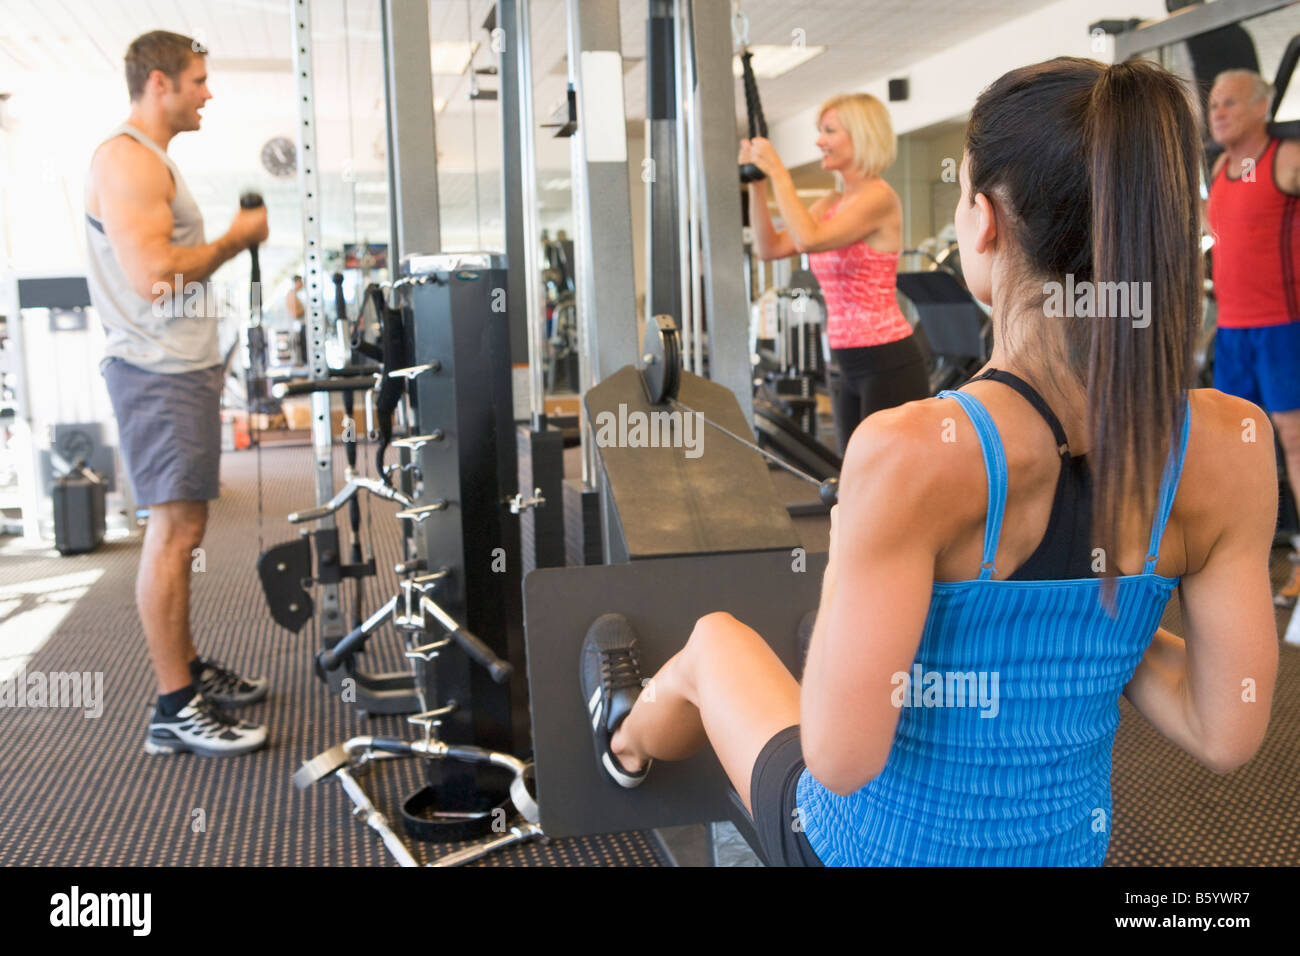 Group Of People Weight Training At Gym Stock Photo